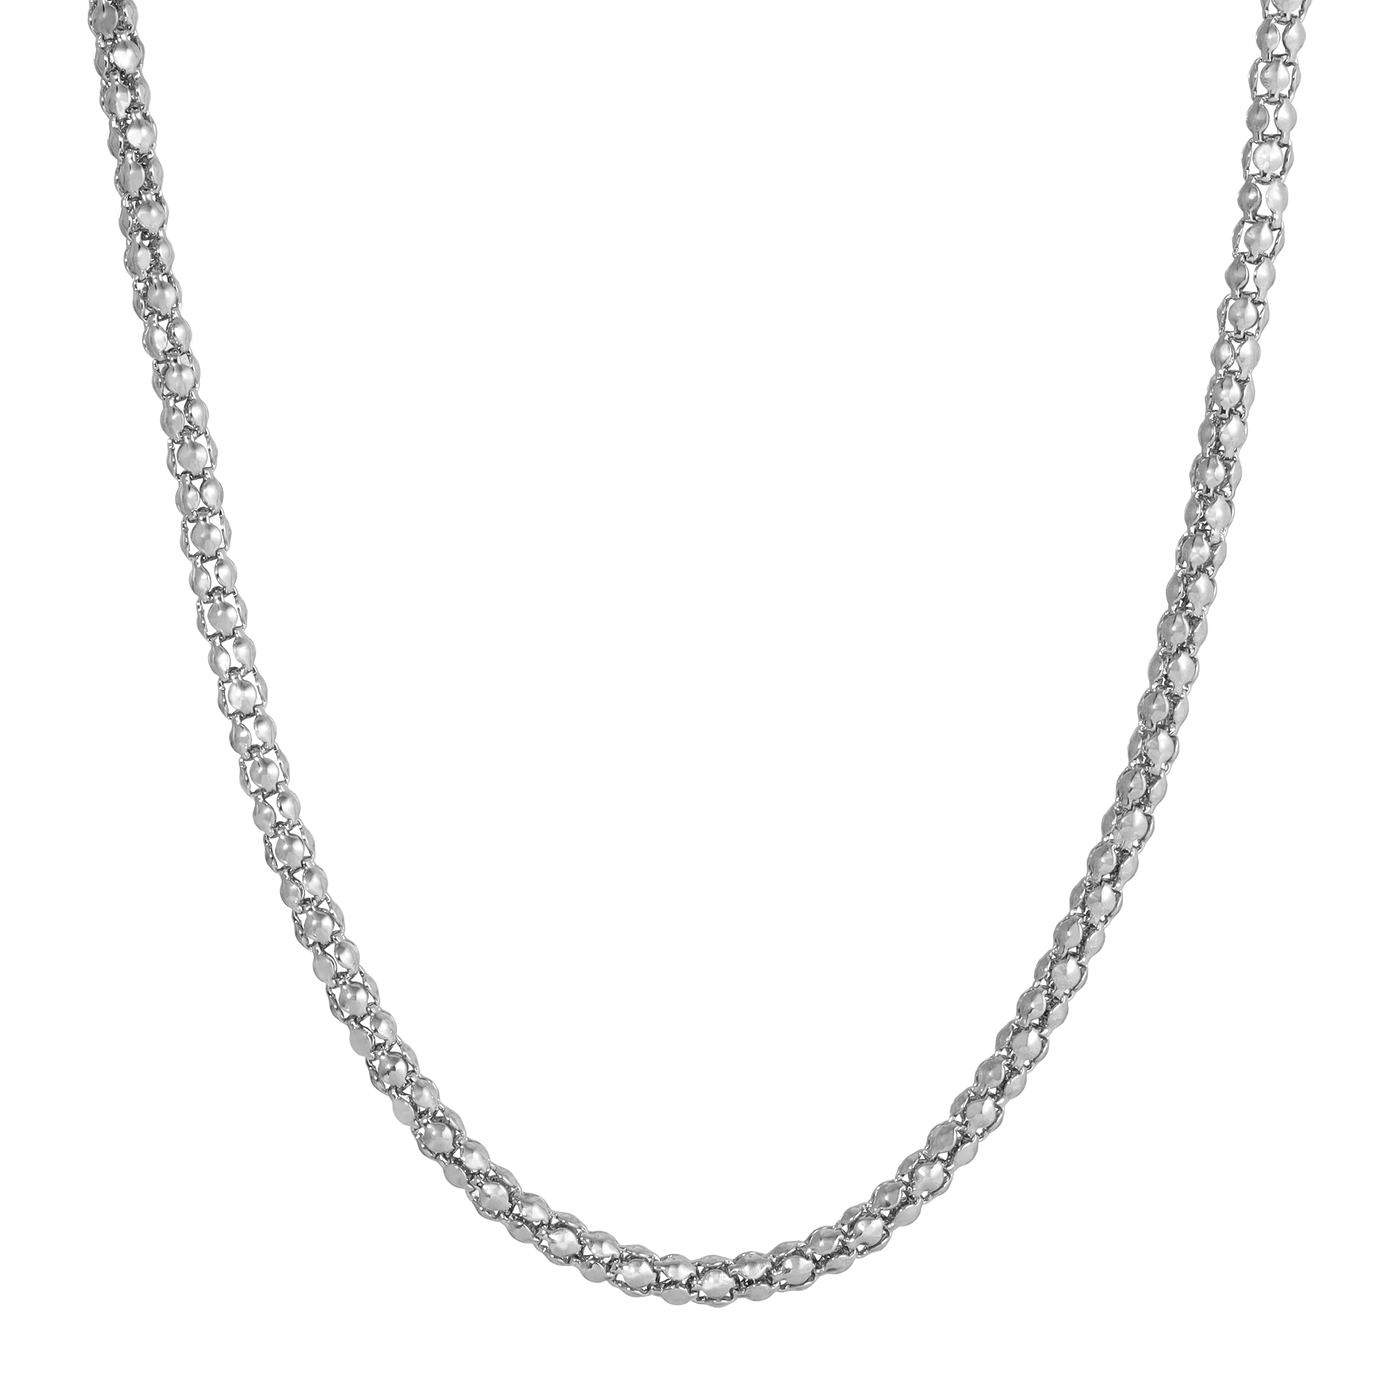 Rhodium Plated 31" Chain Necklace